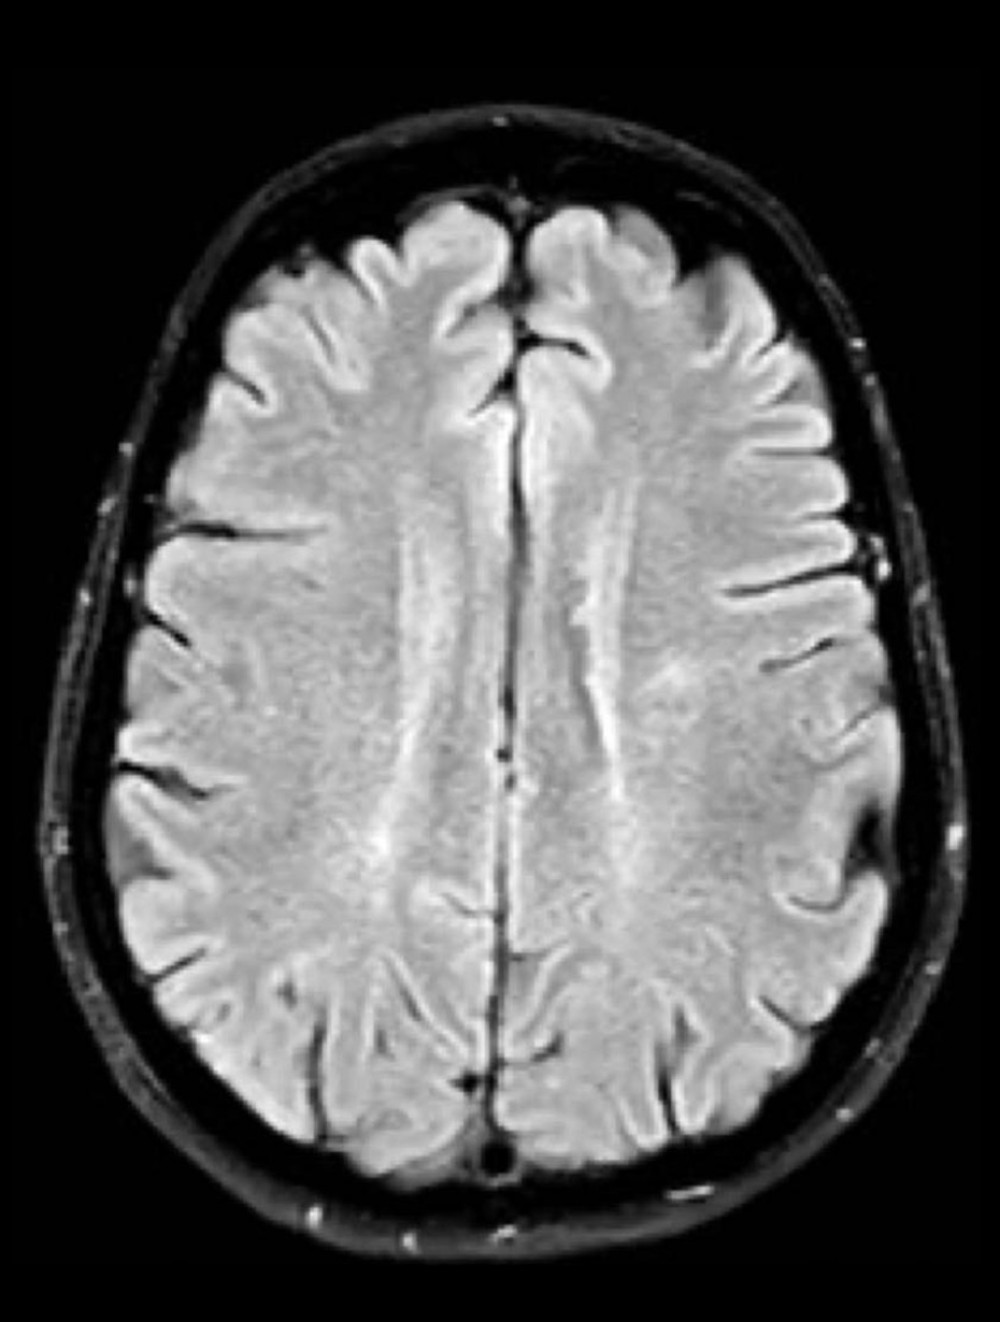 Magnetic resonance imaging of the proband’s mother showing the absence of any specific brain matter lesions.